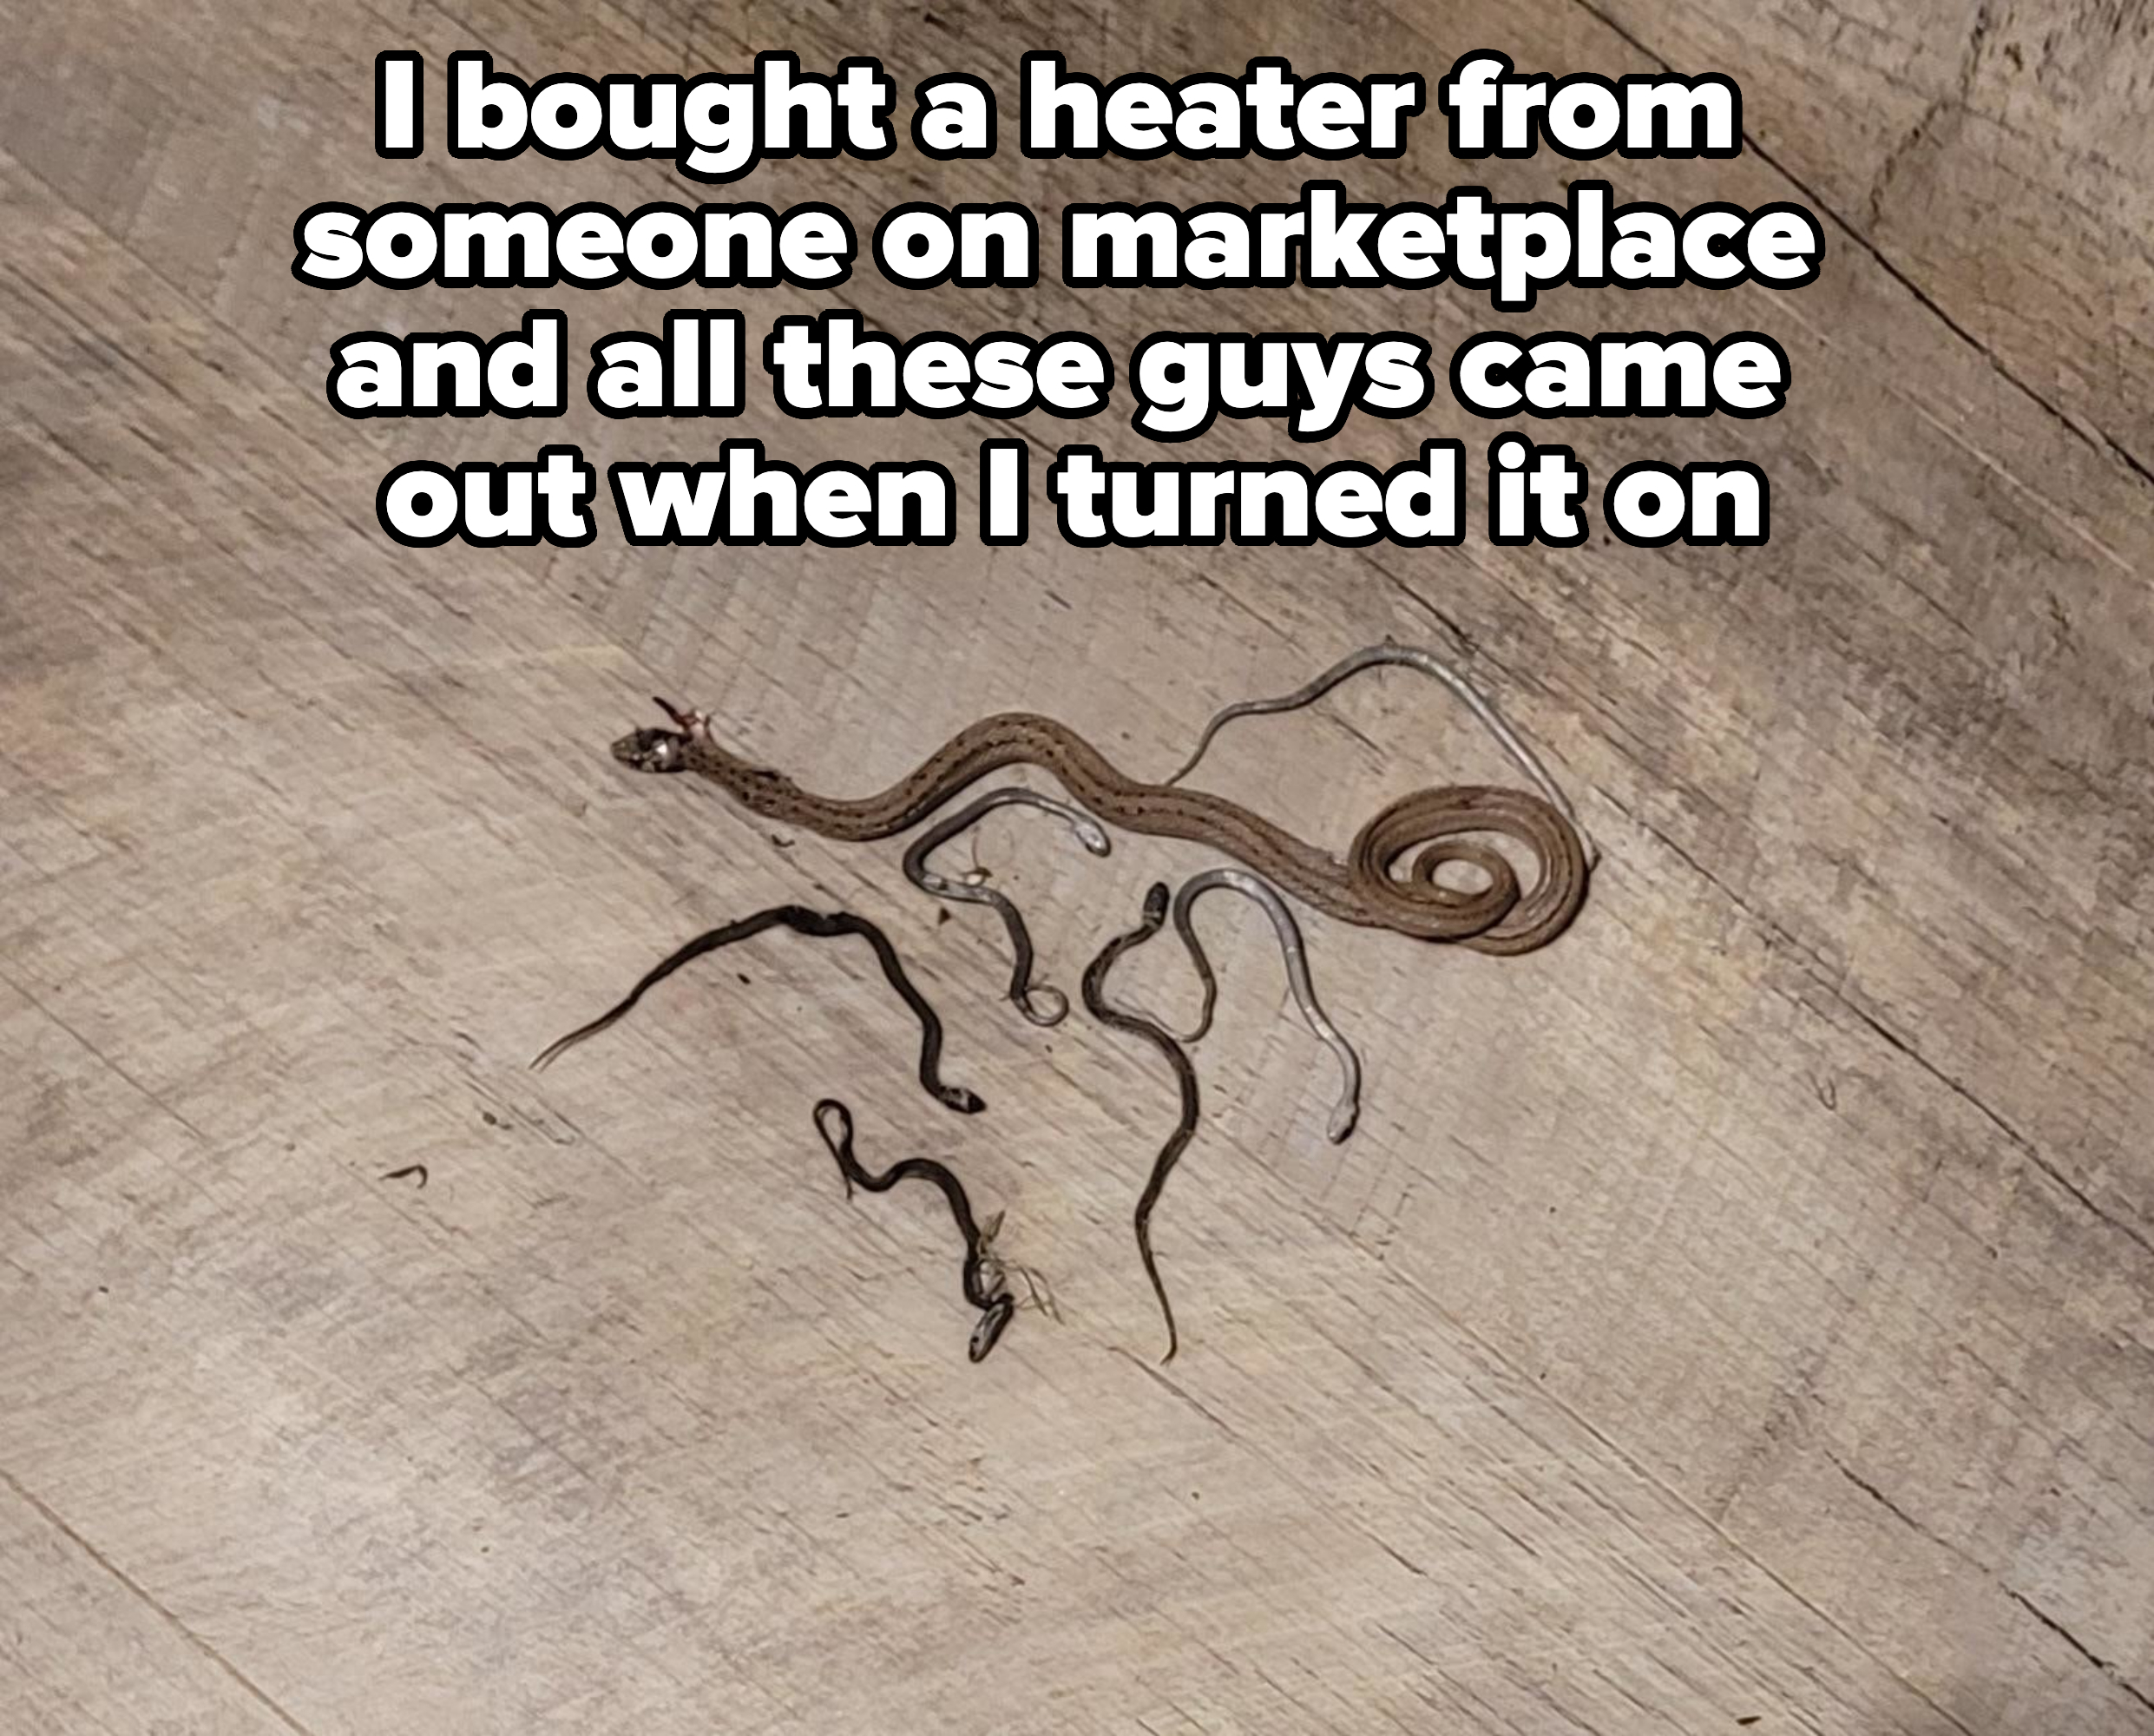 Snakes of different sizes on the floor, with caption, &quot;I bought a heater from someone on Marketplace and all these guys came out when I turned it on&quot;